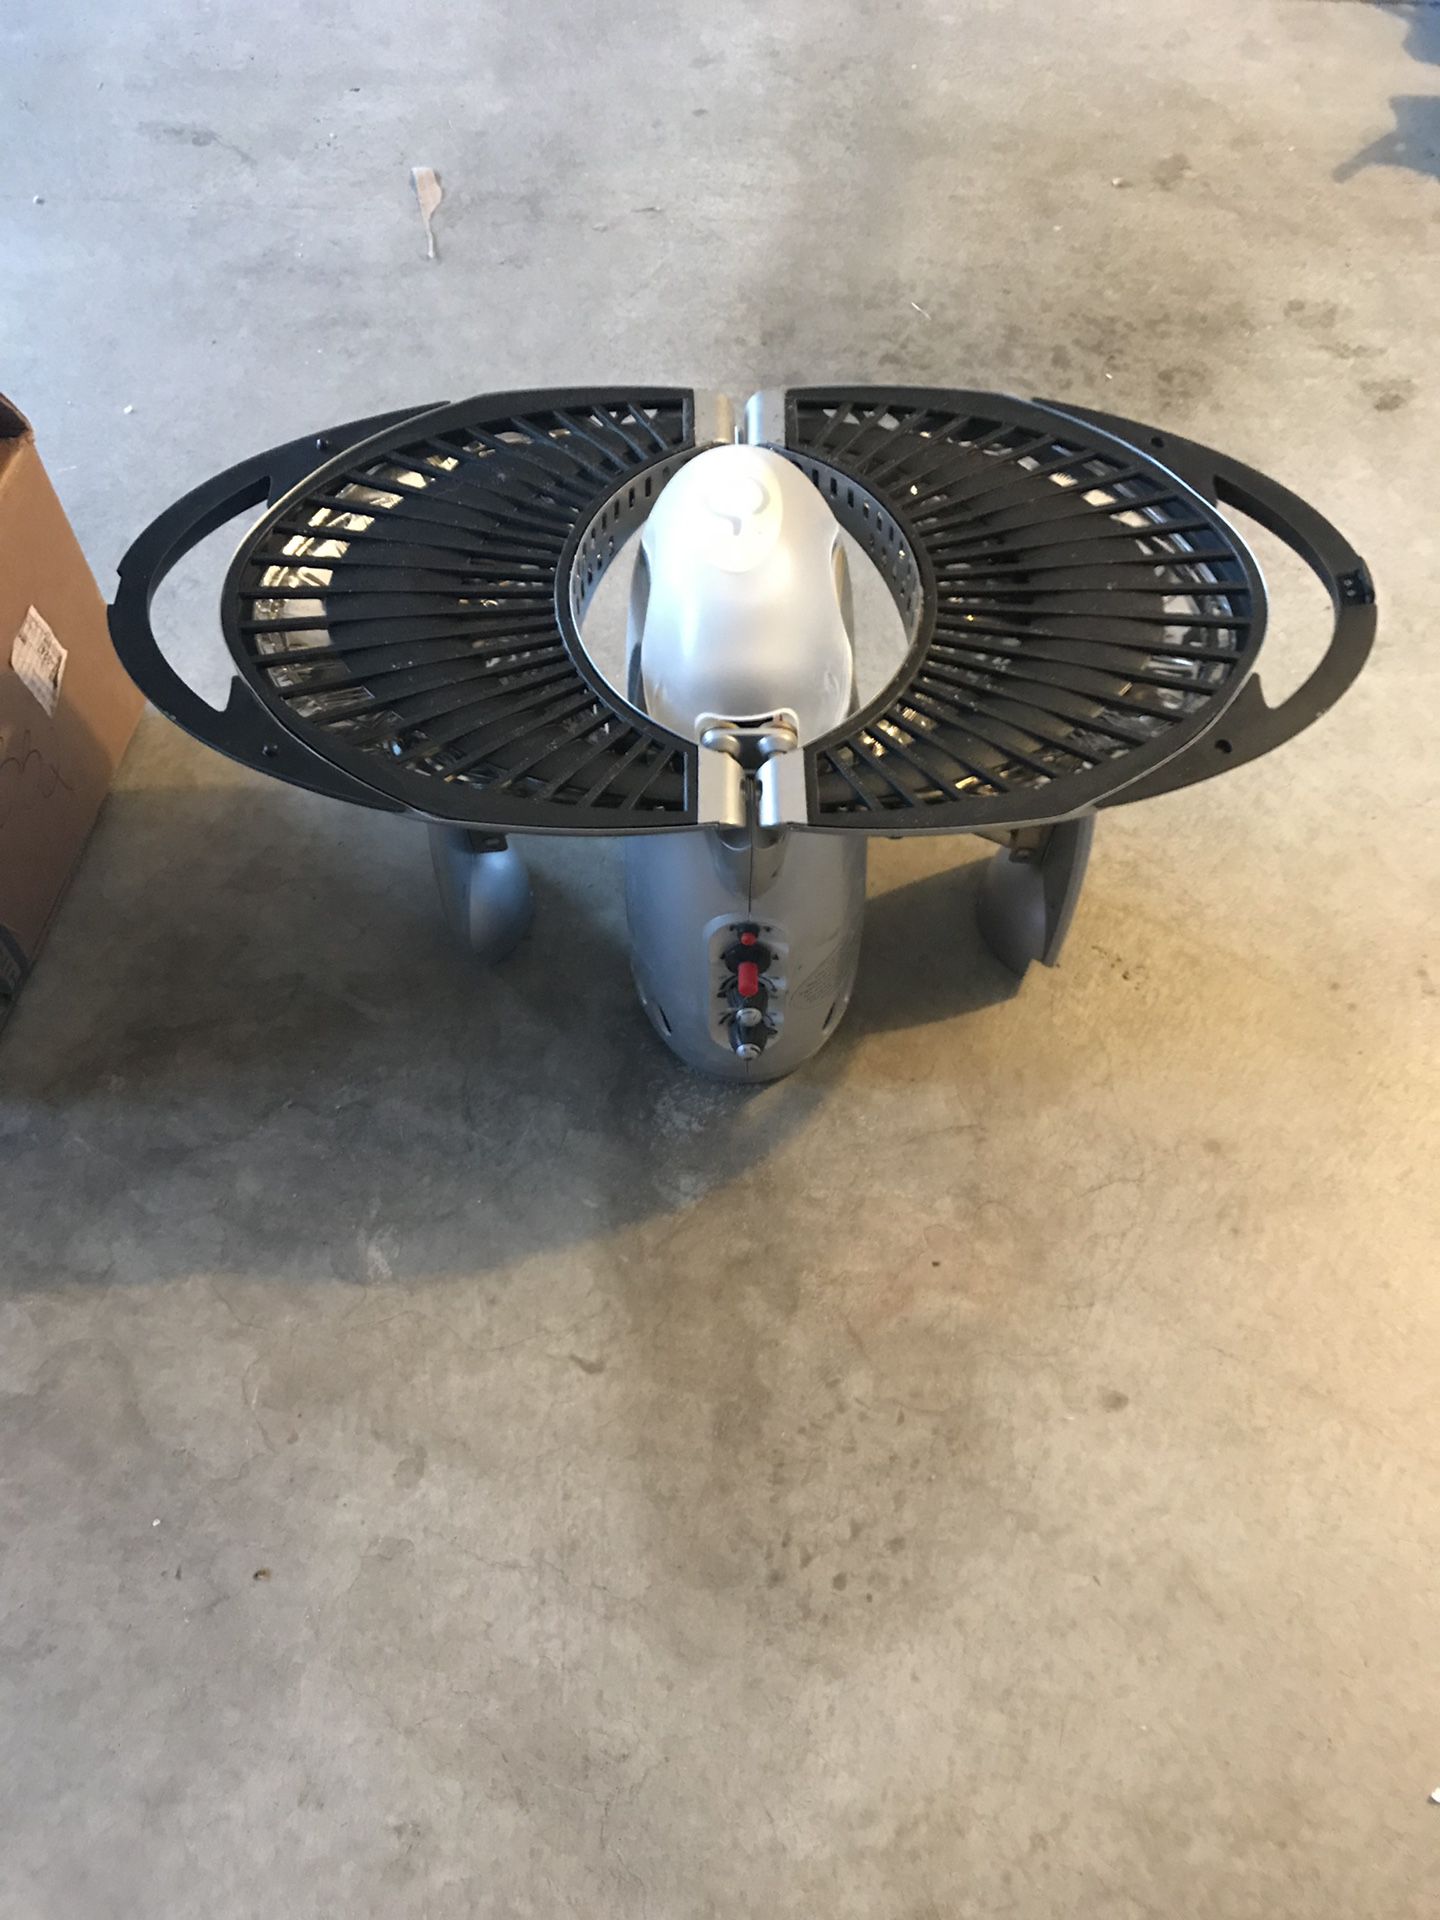 Portable grill/ bbq uses propane